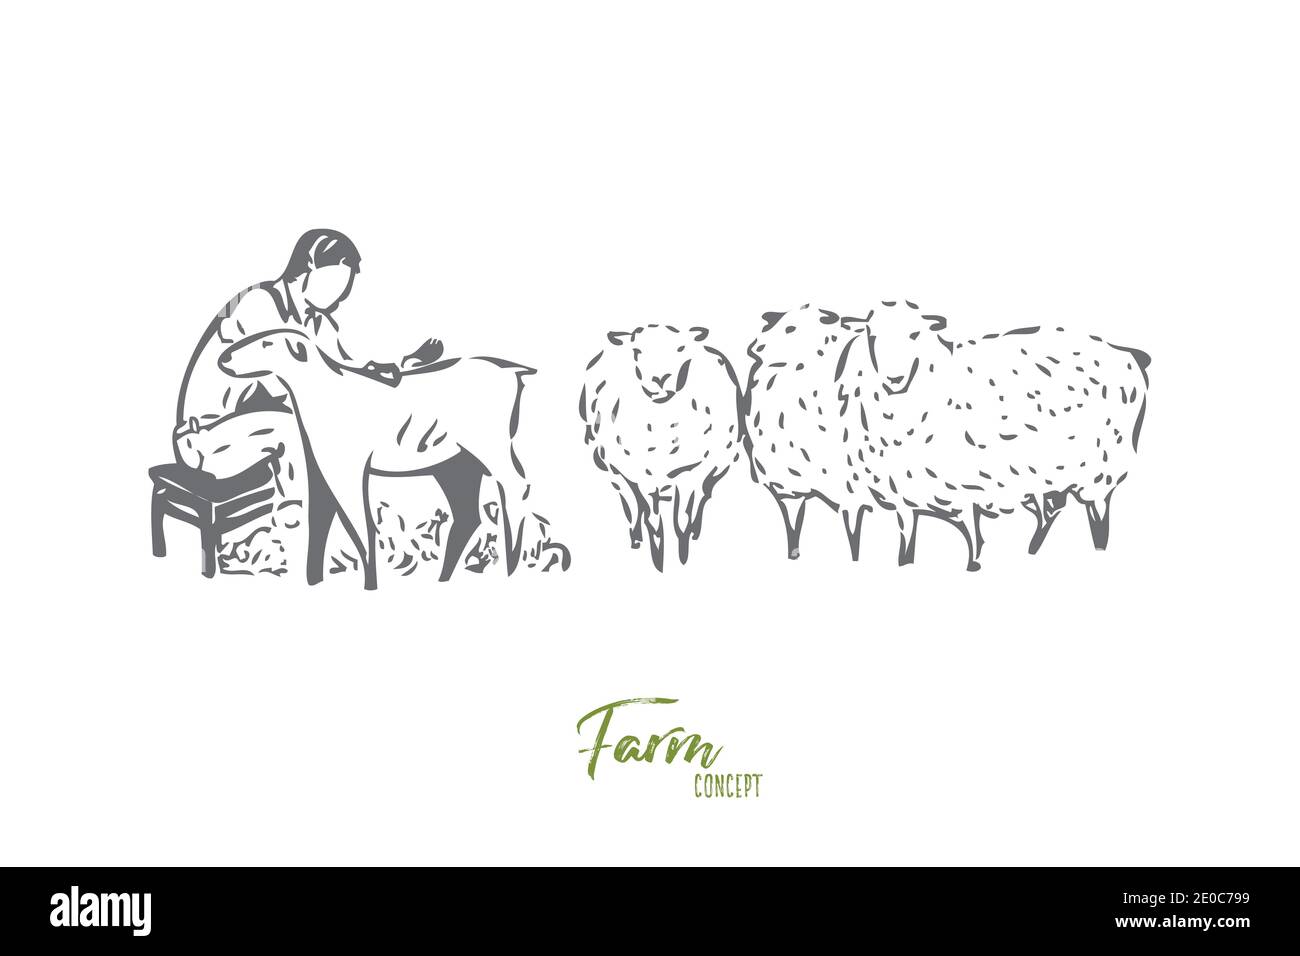 Collecting wool concept sketch. Man, livestock worker, farmer shearing sheep. Looking after farm animals. Countryside lifestyle jobs, responsibilities Stock Vector